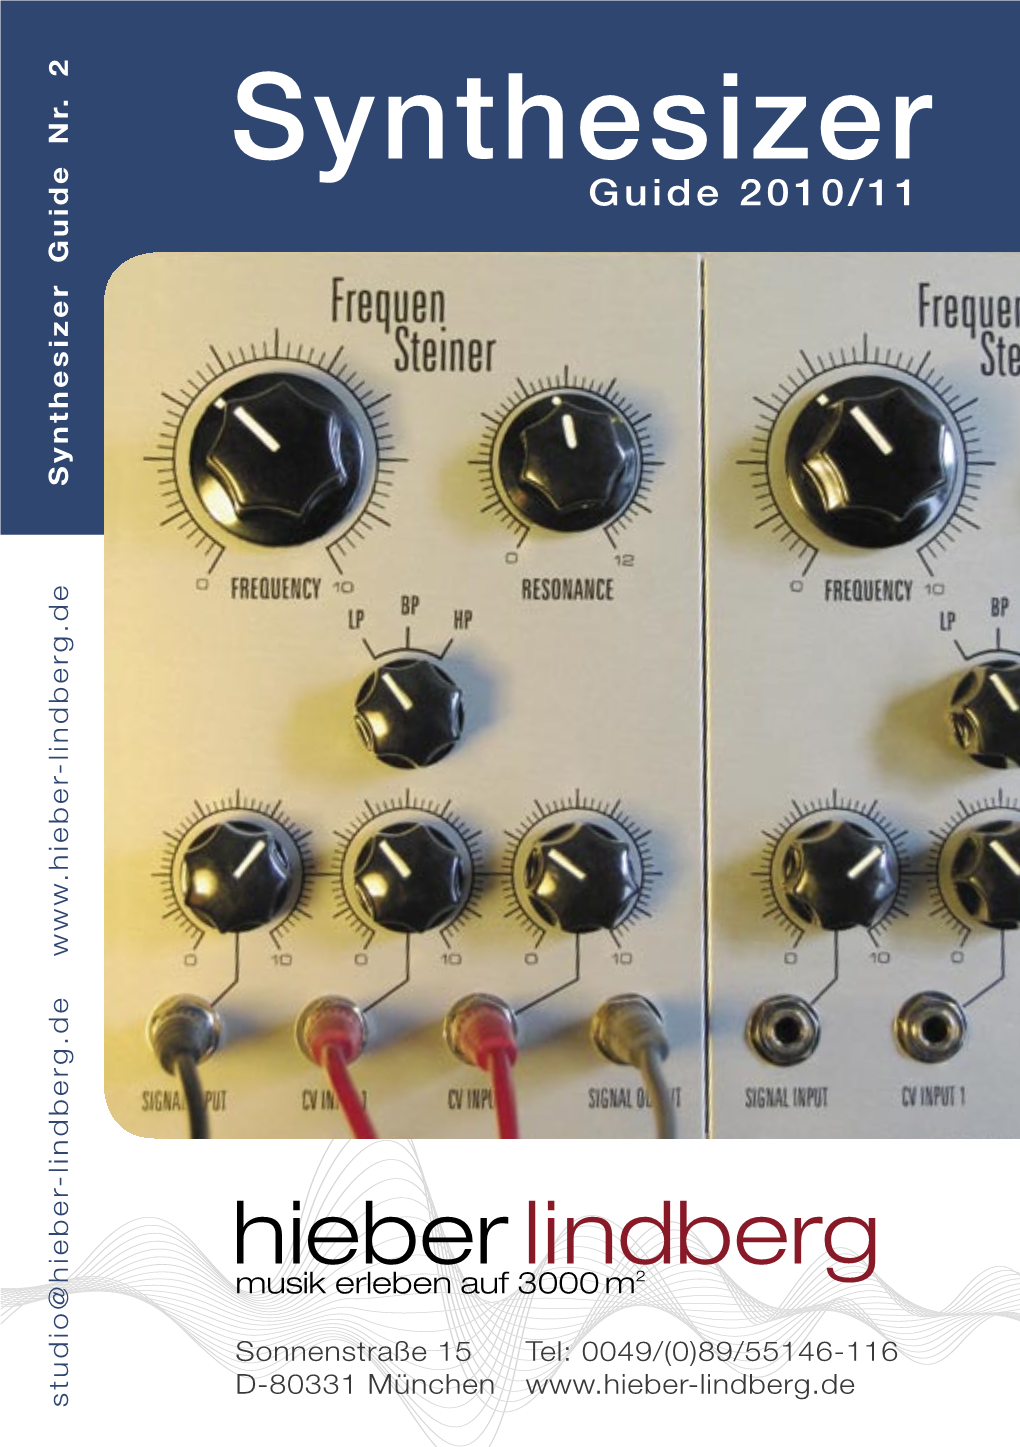 Synthesizer Guide 2011